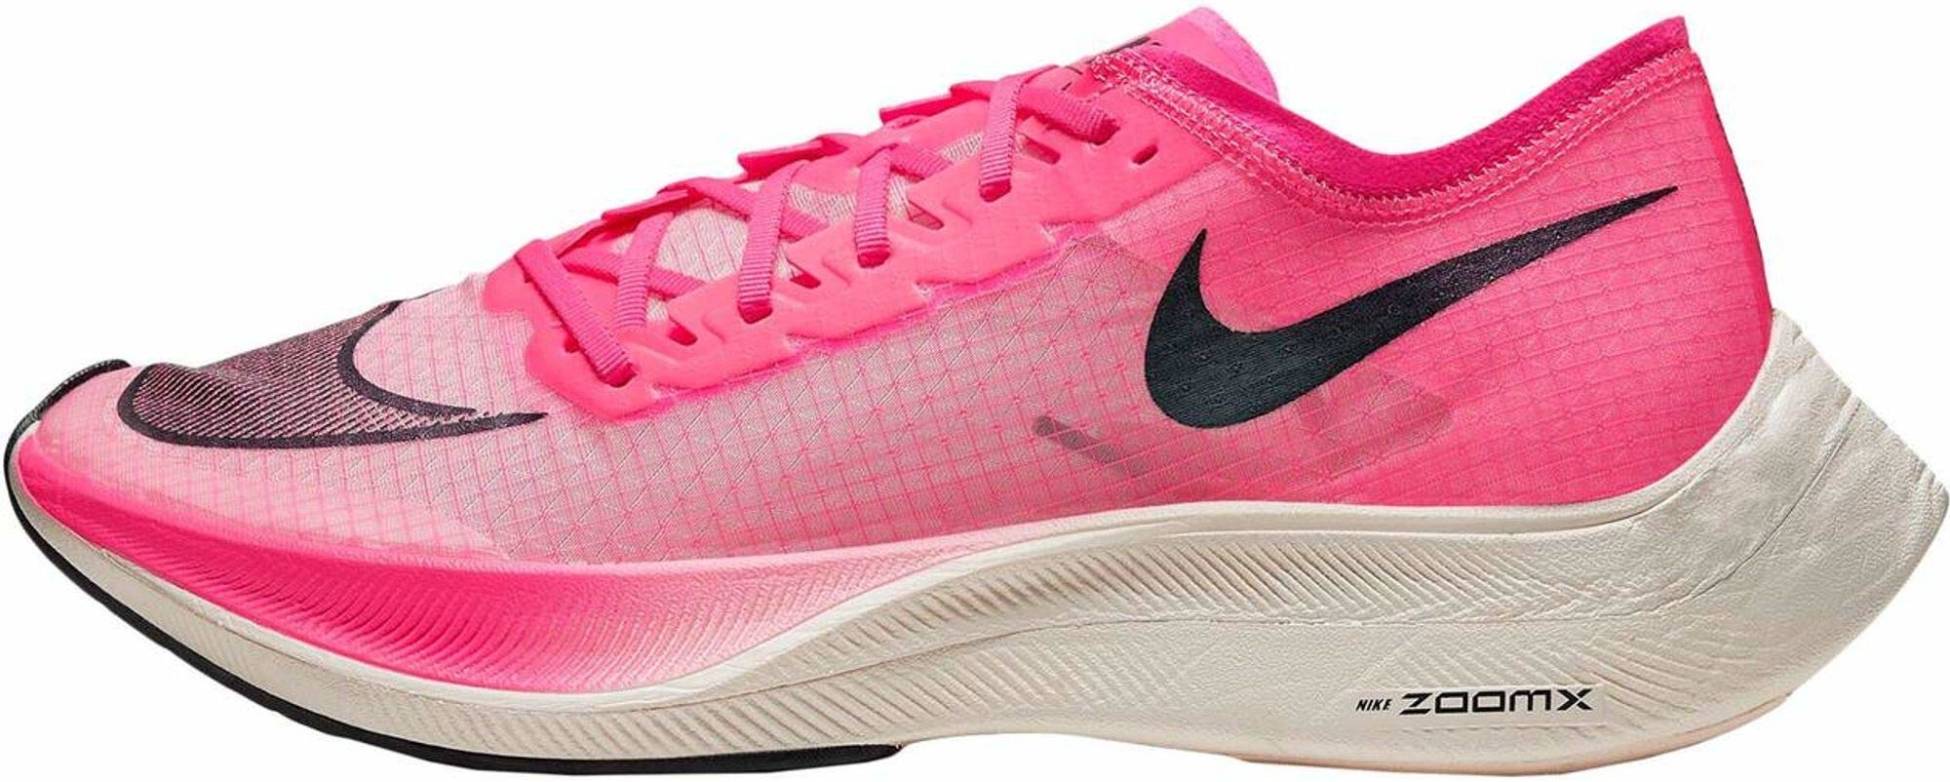 6 Pink Nike running shoes: Save up to 